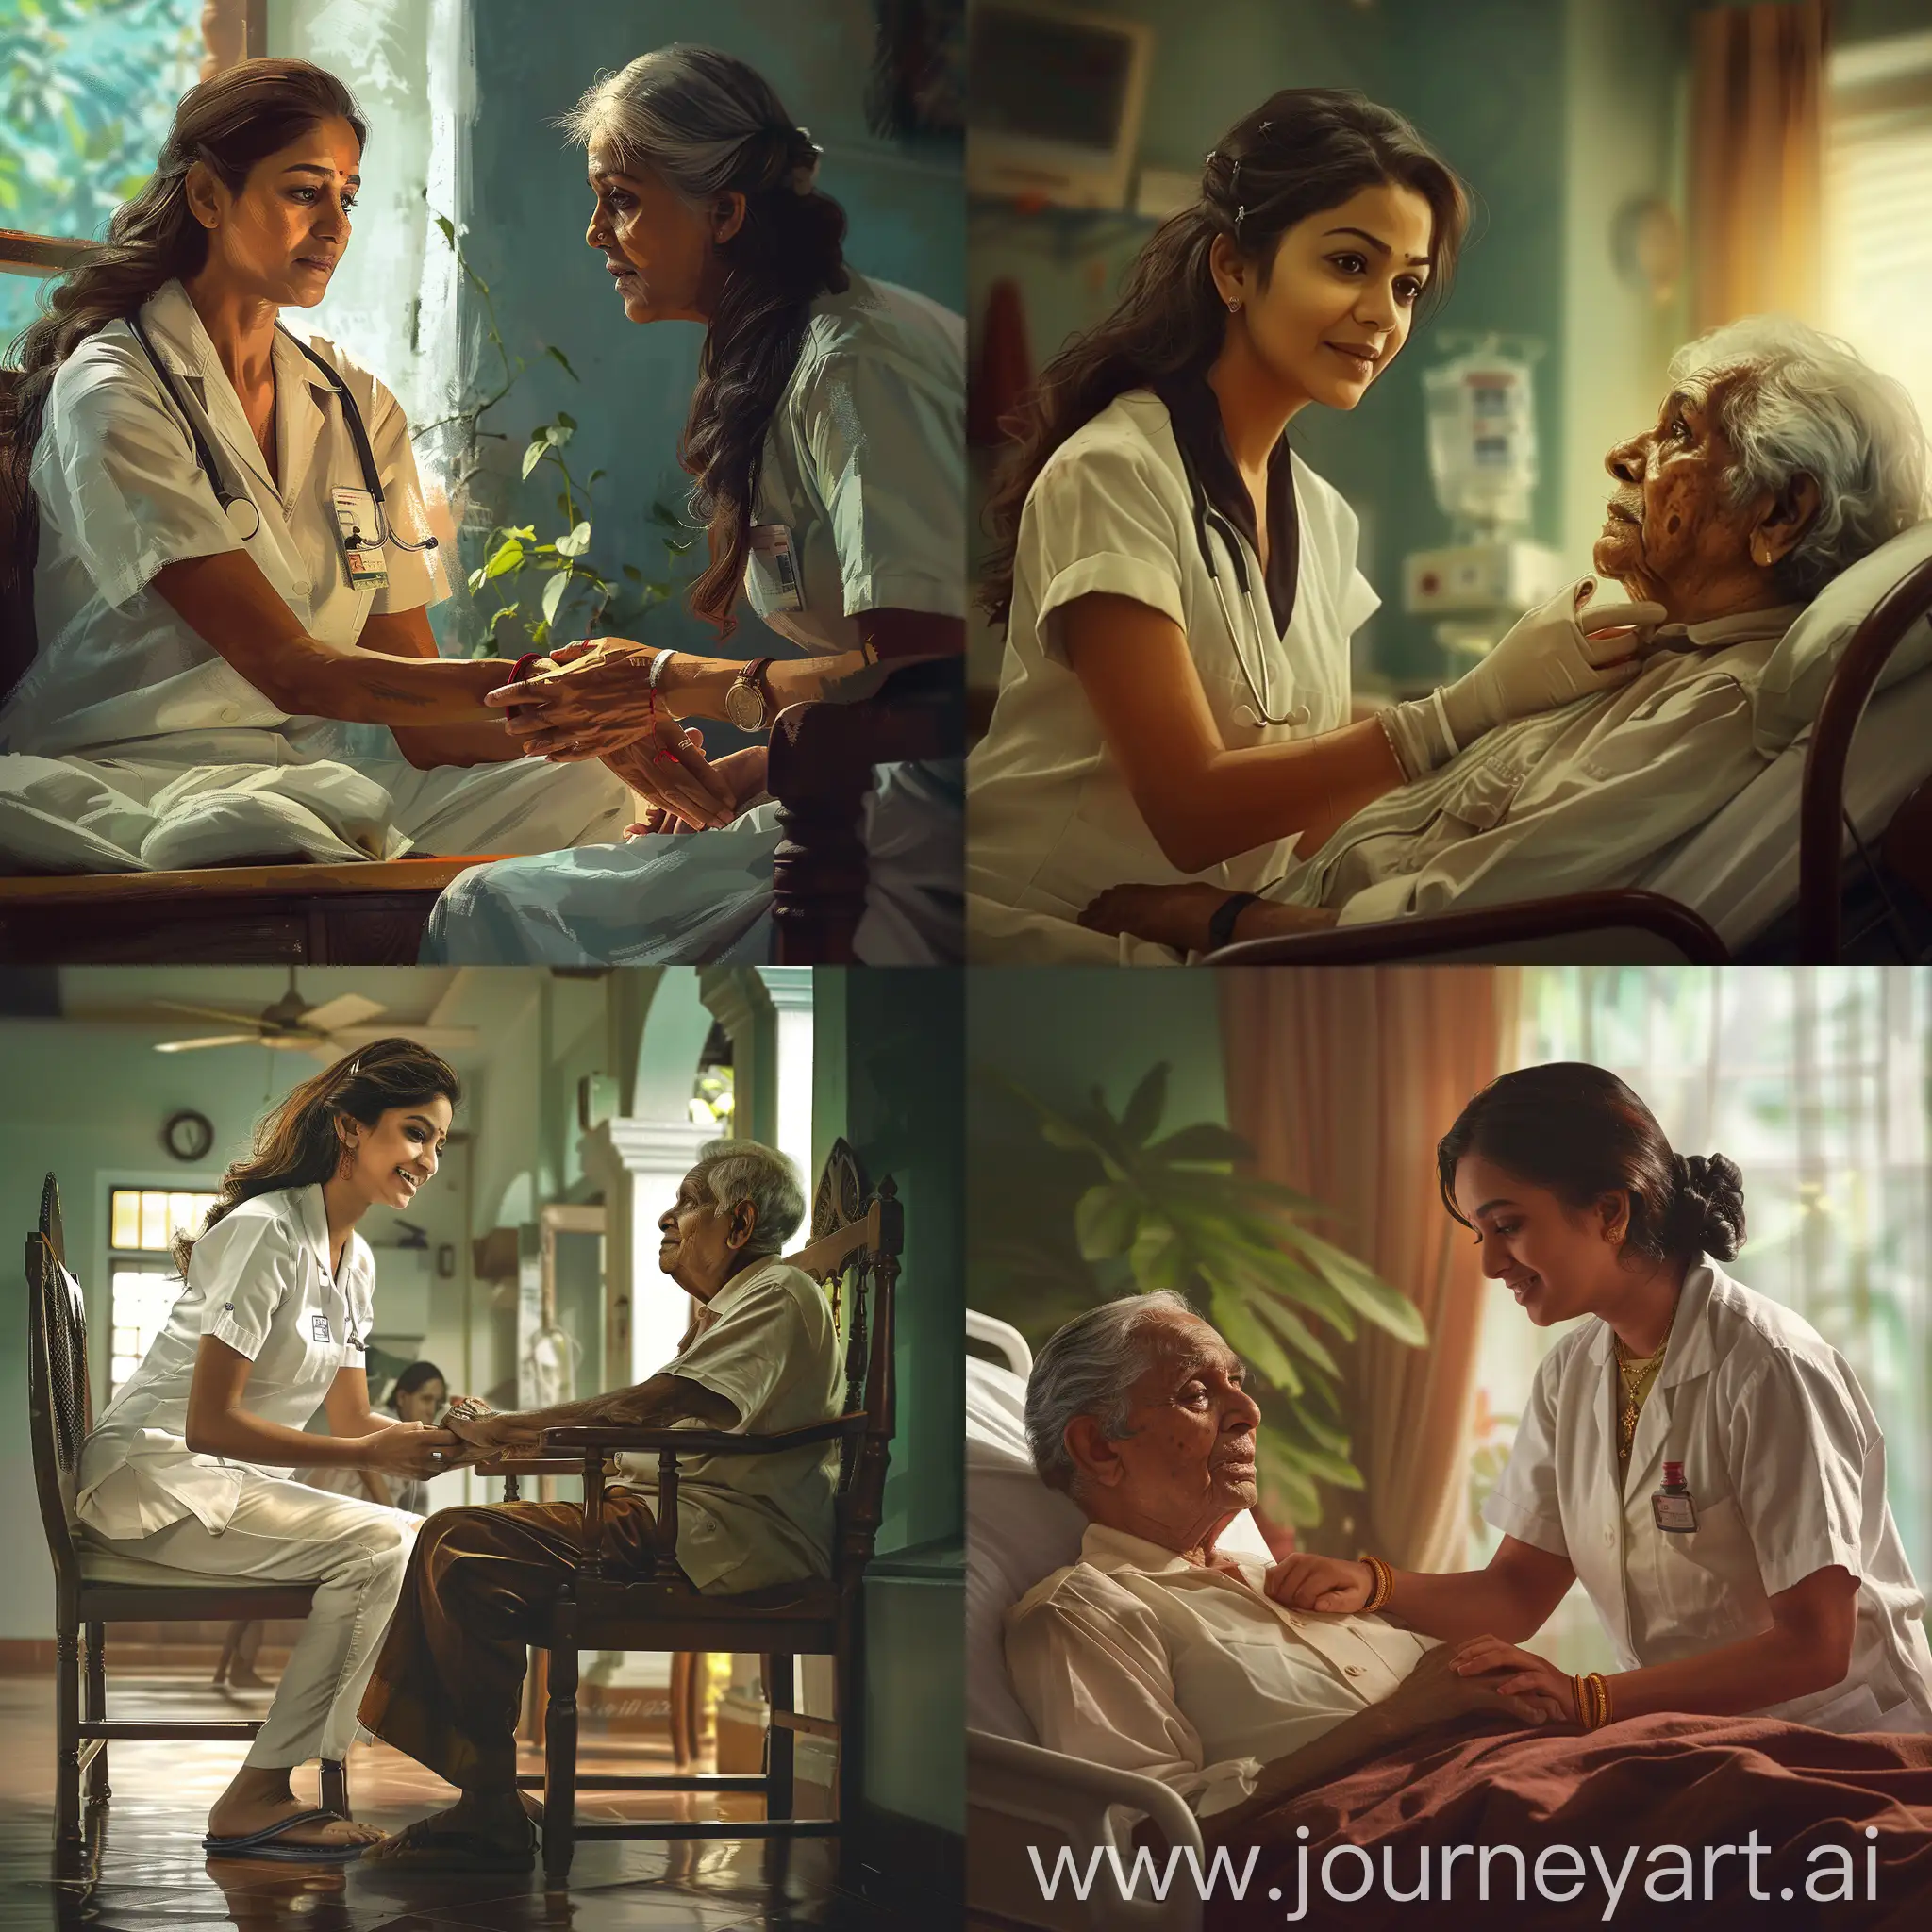 a stunning photo of a scene "a Female Malayali nurse from Kerala, taking care of an old patient", curvy, beautiful, picturesque, photorrealistic, A very well crafted, detailed, subtle smooth color tone, a Kerala general hospital world background